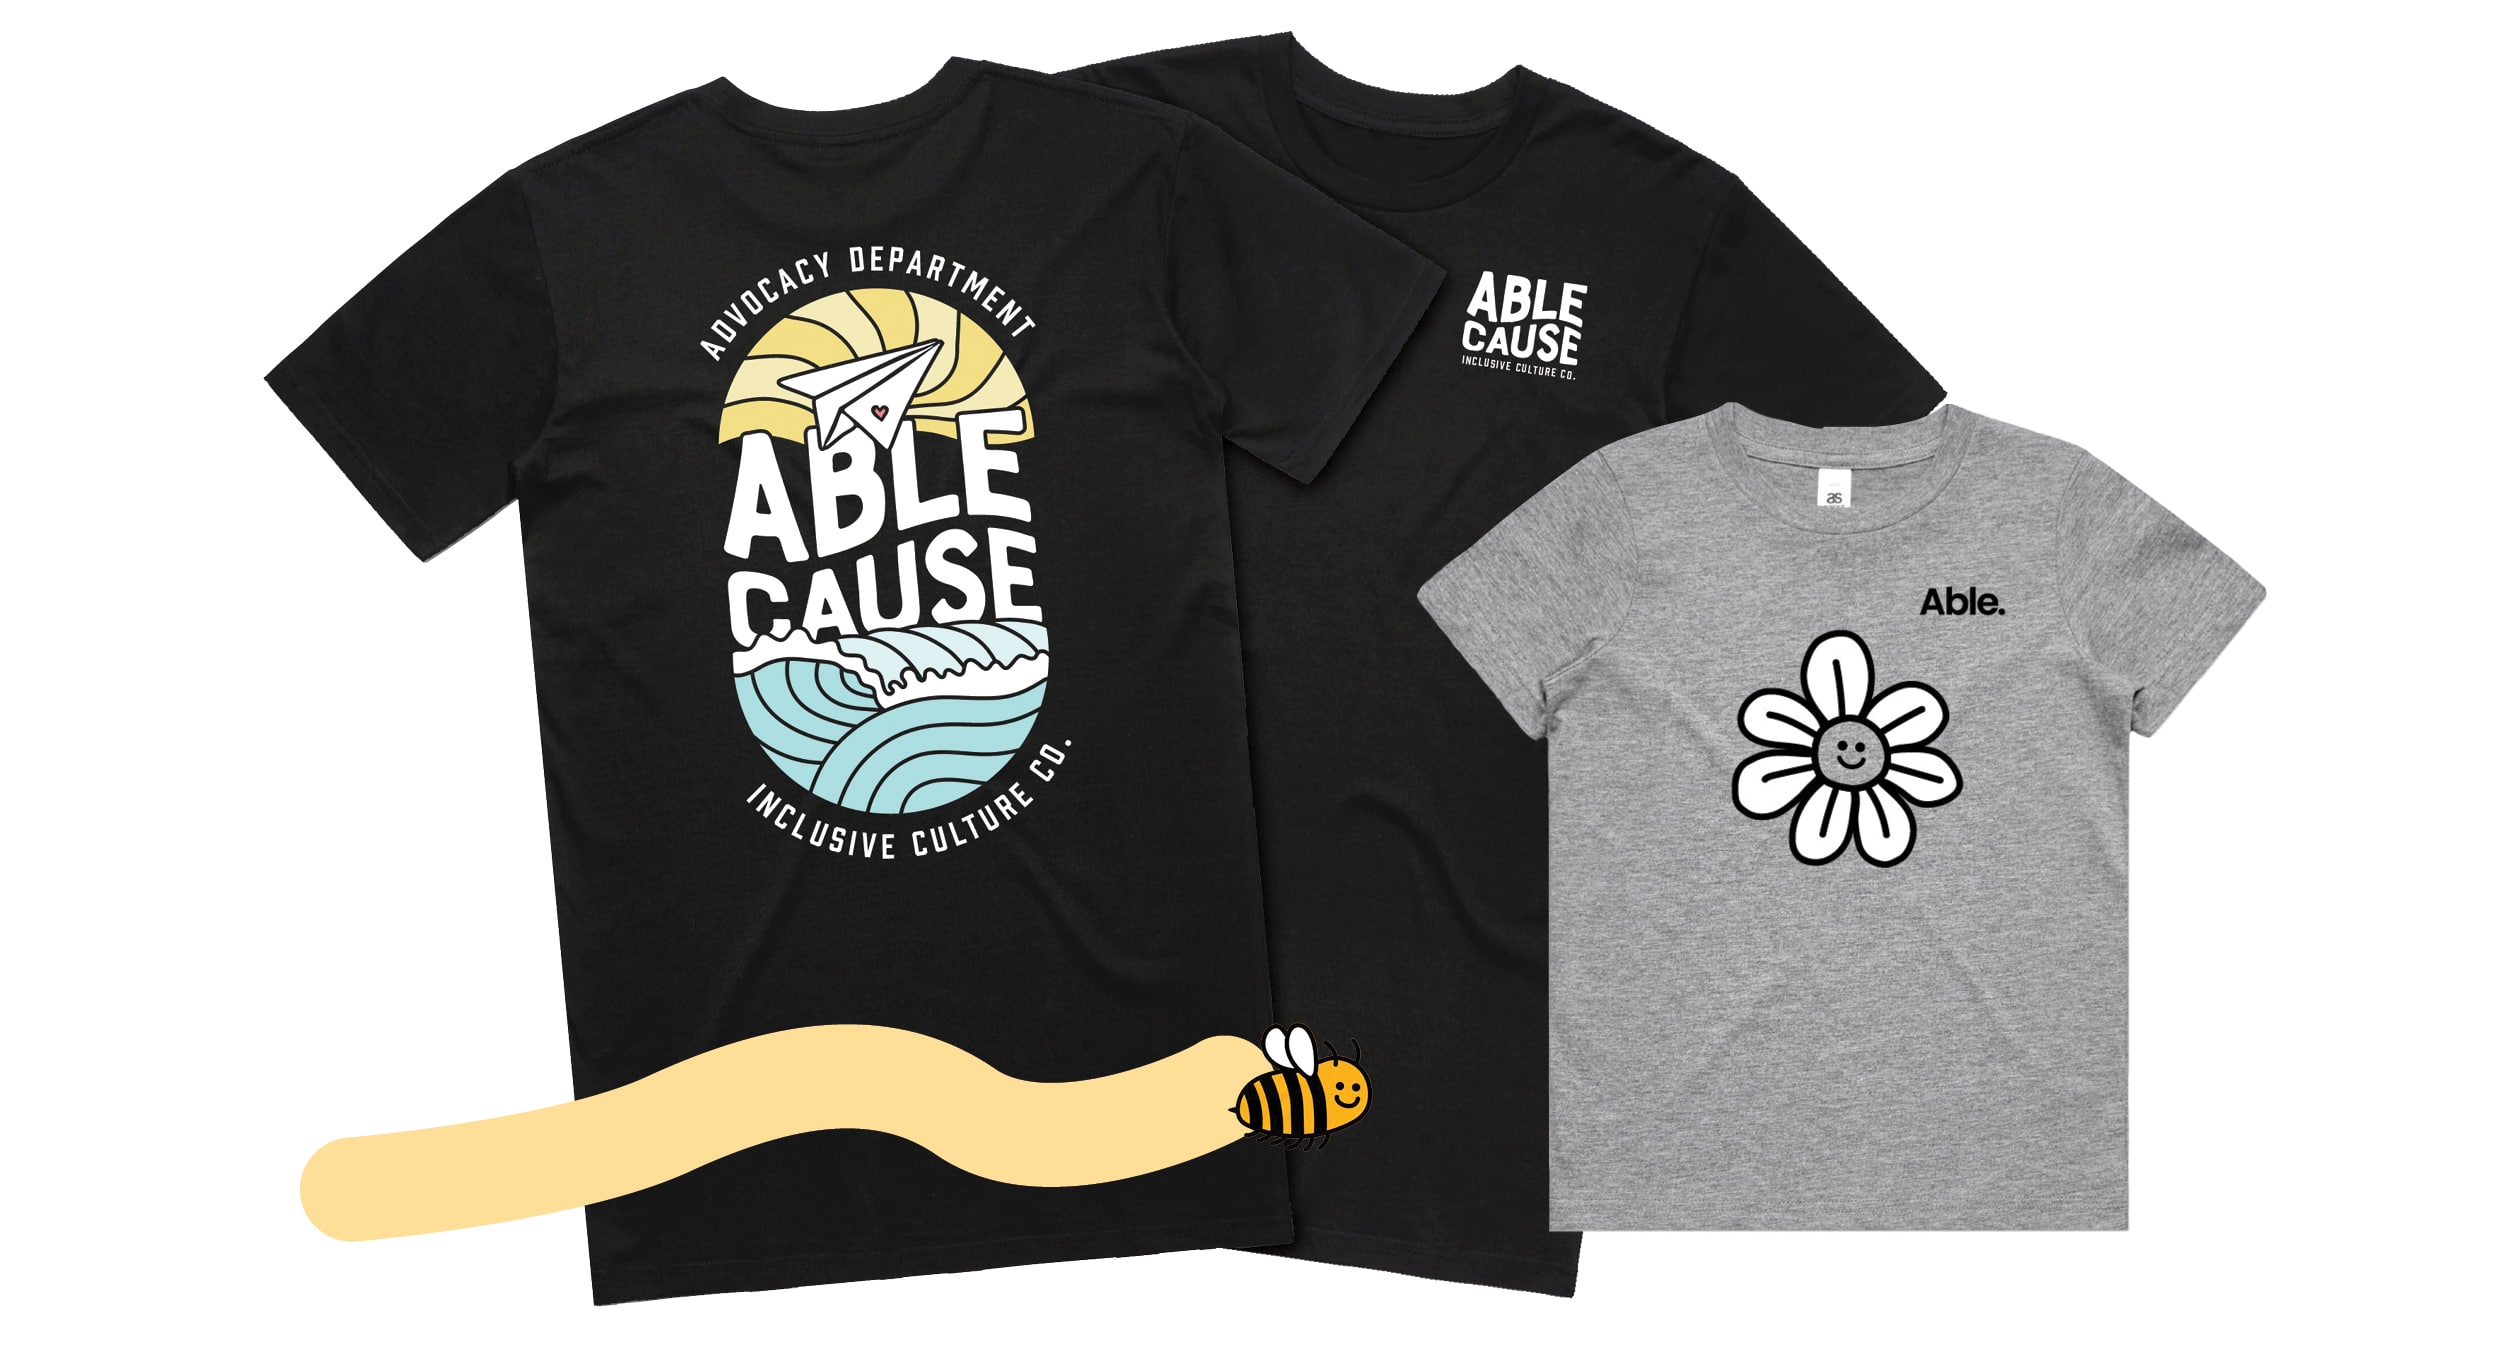 t-shirts from Able Cause